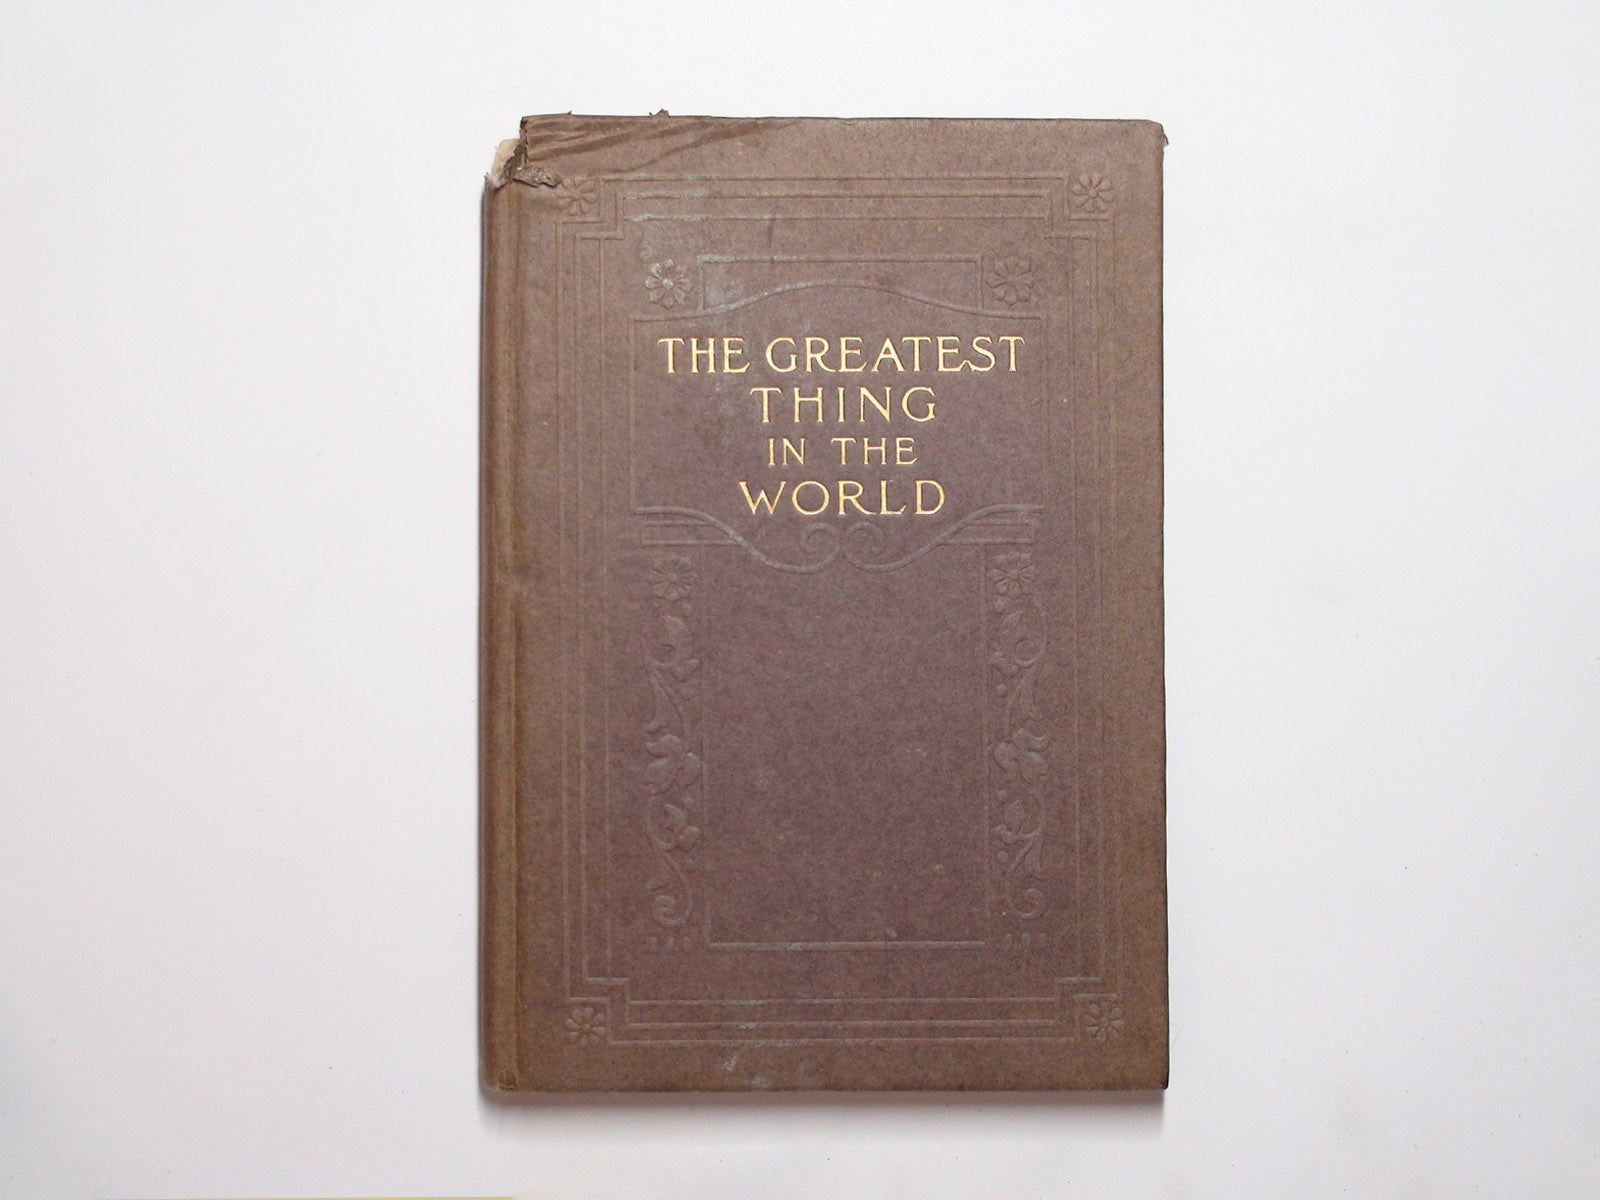 The Greatest Thing in the World, by Henry Drummond, Henry Altemus, 1800